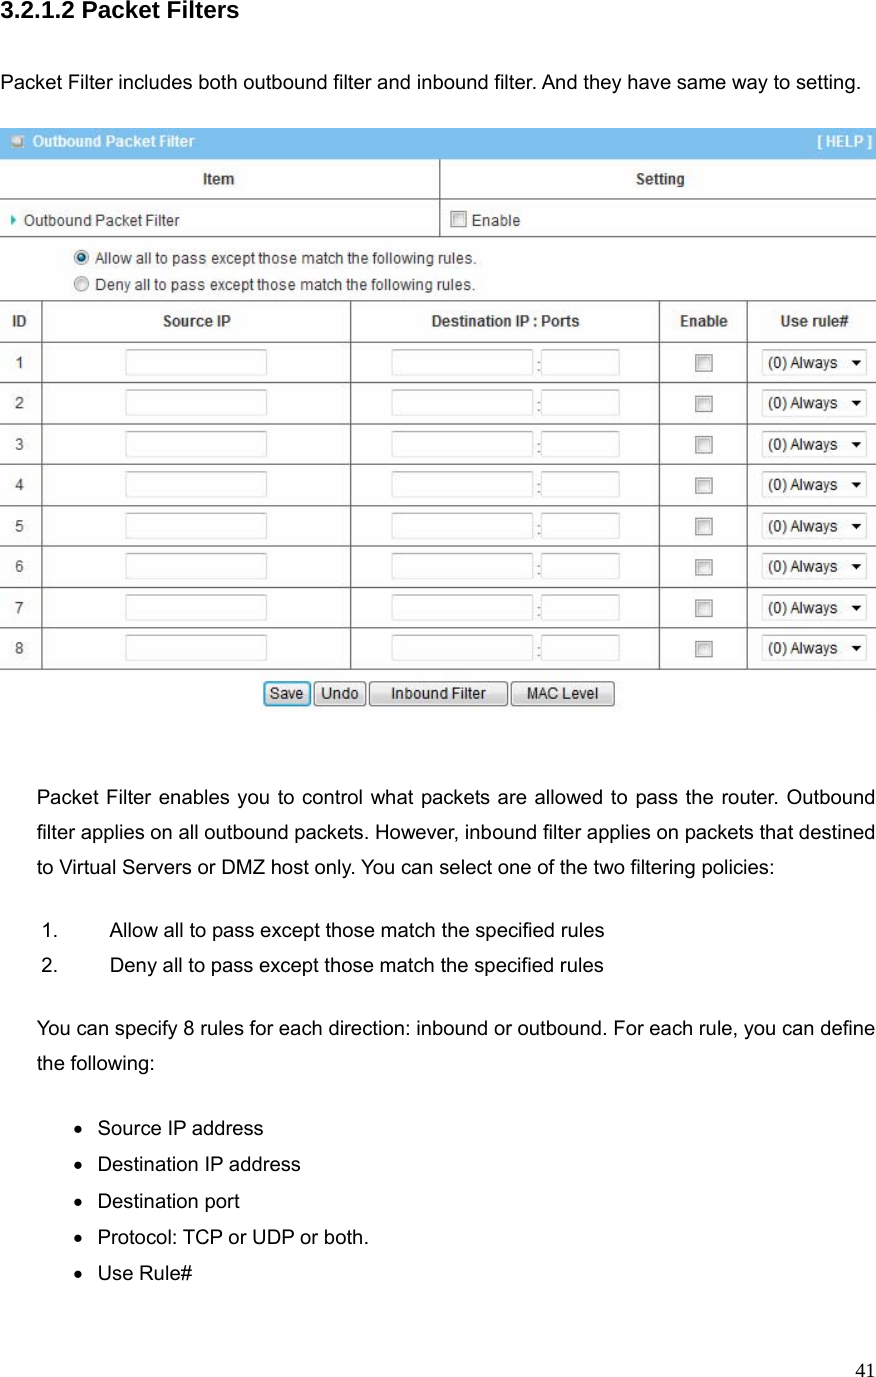  413.2.1.2 Packet Filters   Packet Filter includes both outbound filter and inbound filter. And they have same way to setting.        Packet Filter enables you to control what packets are allowed to pass the router. Outbound filter applies on all outbound packets. However, inbound filter applies on packets that destined to Virtual Servers or DMZ host only. You can select one of the two filtering policies: 1.  Allow all to pass except those match the specified rules   2.  Deny all to pass except those match the specified rules You can specify 8 rules for each direction: inbound or outbound. For each rule, you can define the following:   • Source IP address •  Destination IP address   • Destination port •  Protocol: TCP or UDP or both. • Use Rule# 